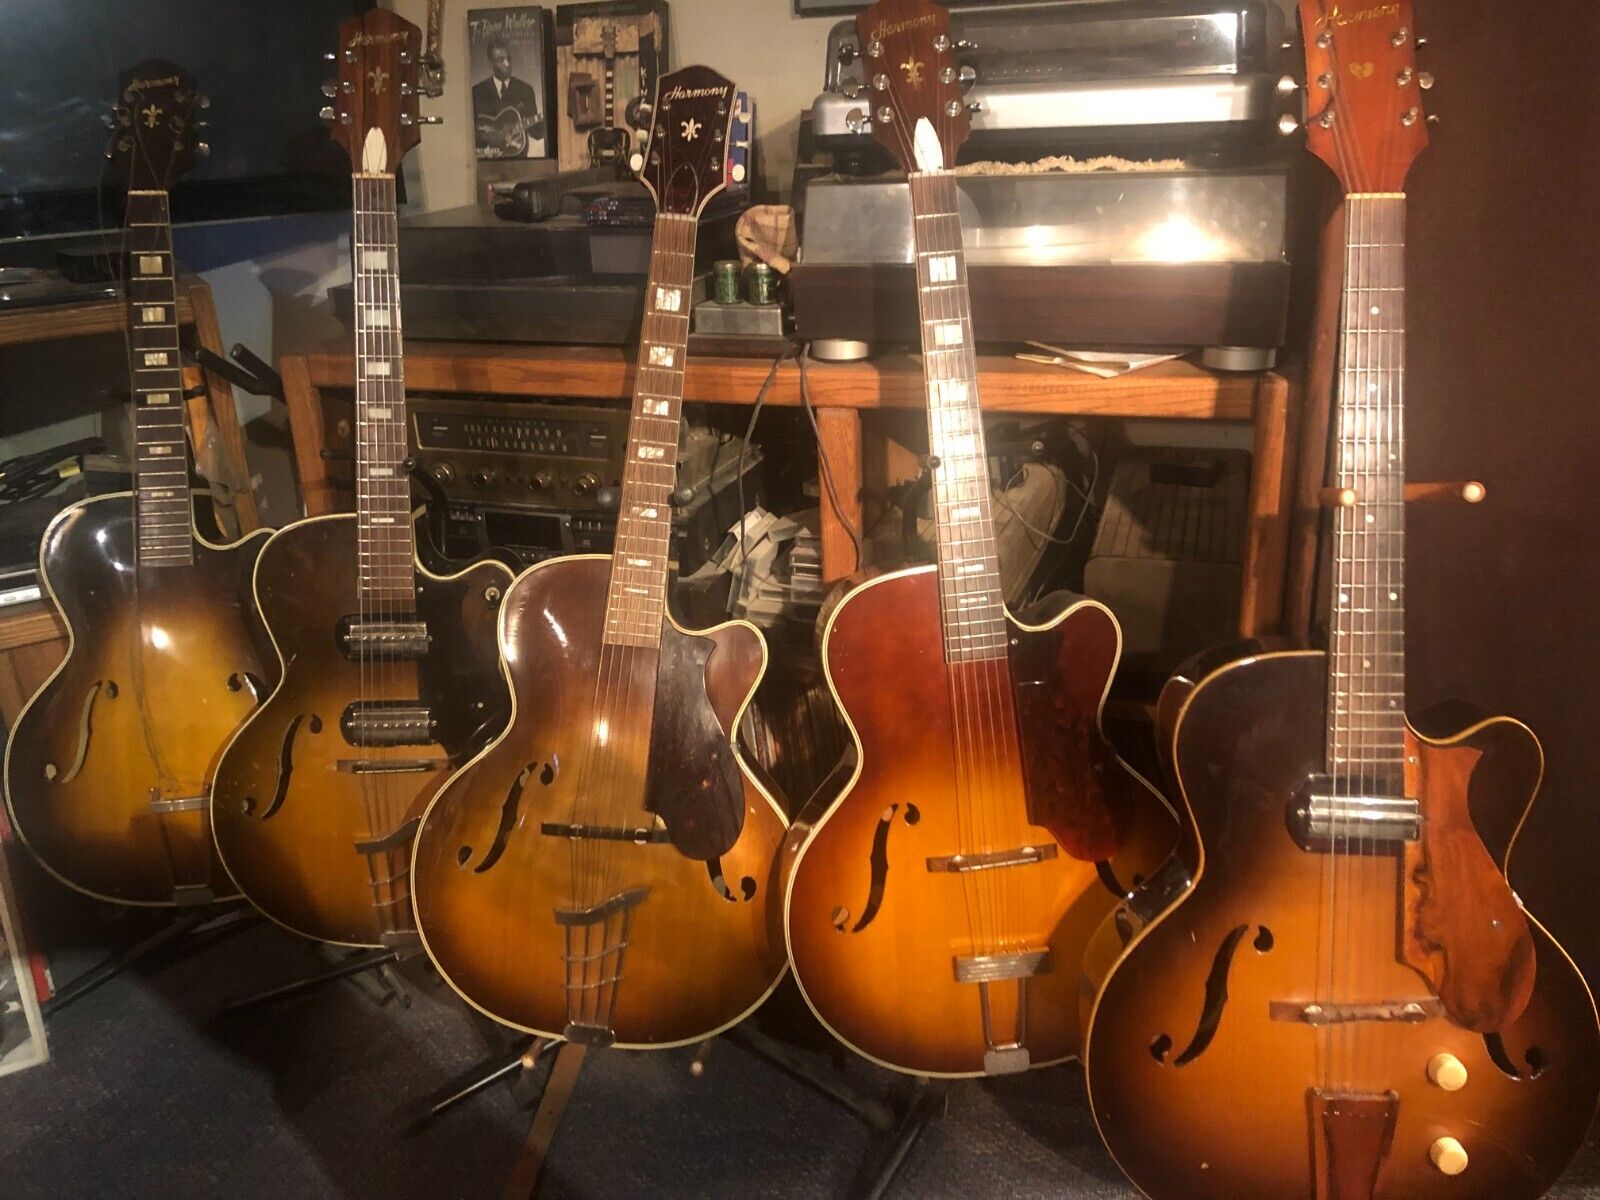 Lot of 5 1950\'s/60\'s USA made Harmony guitars H61, H62, H1310 Electric/Acoustic